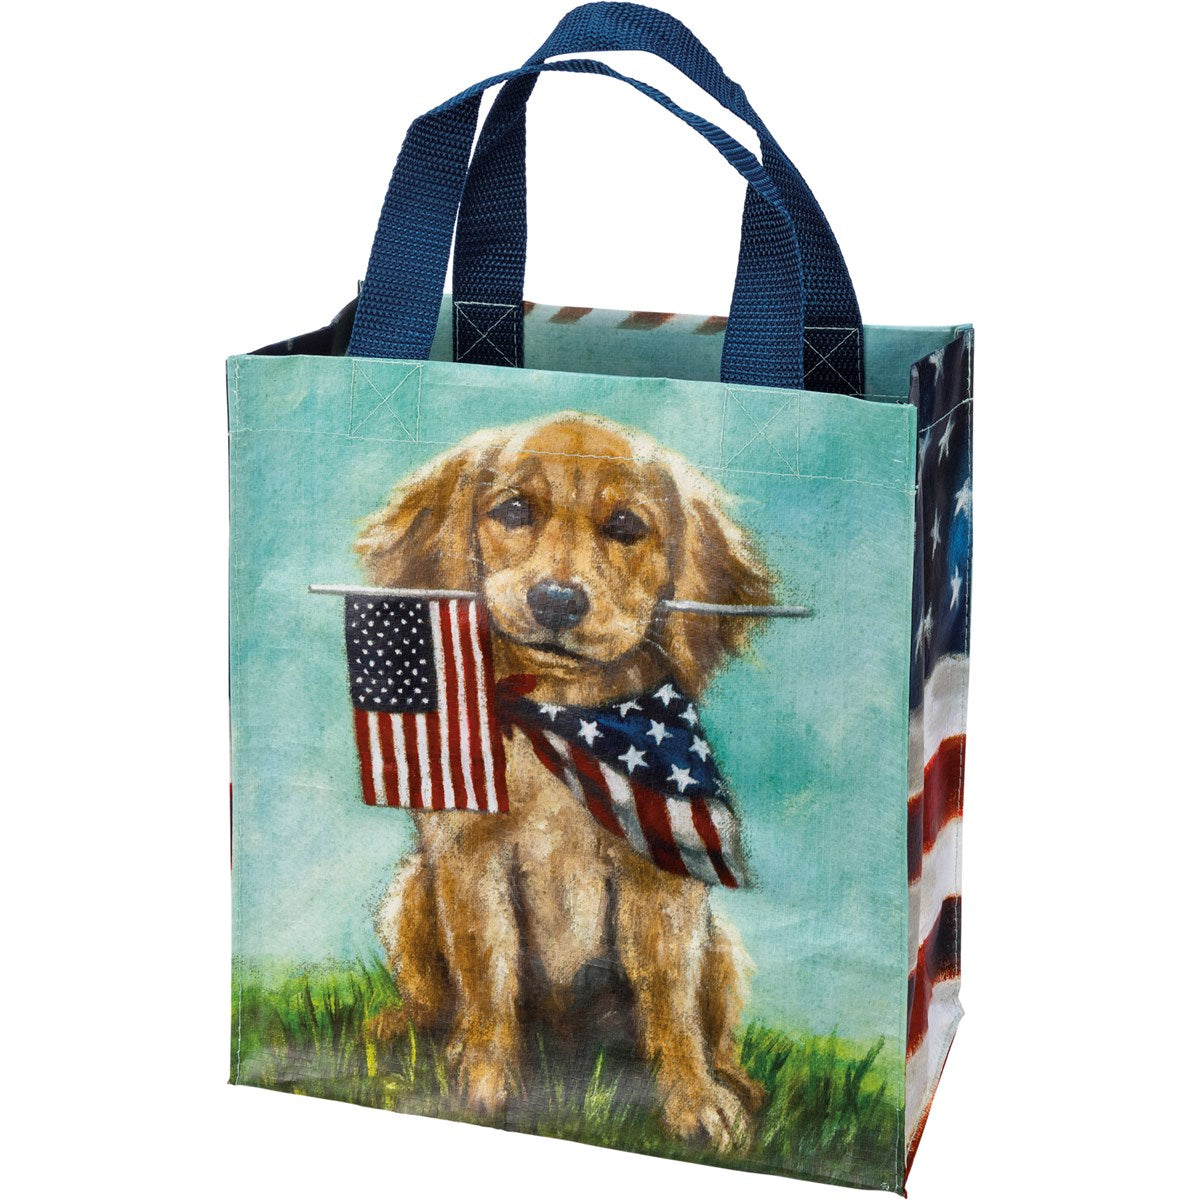 💙 Dog with American Flag Market Tote Bag